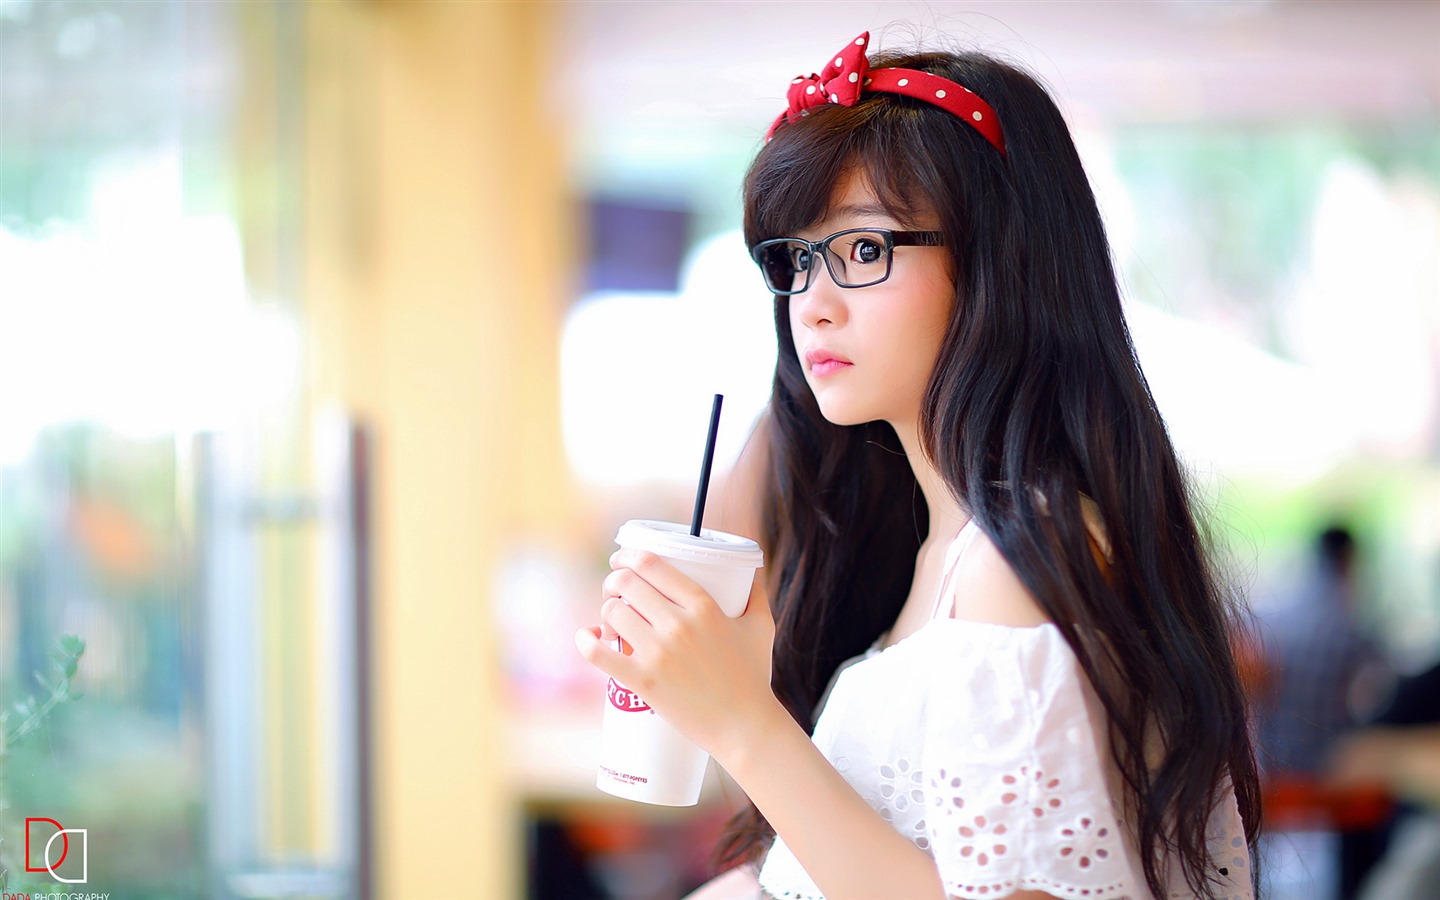 Pure and lovely young Asian girl HD wallpapers collection (3) #32 - 1440x900